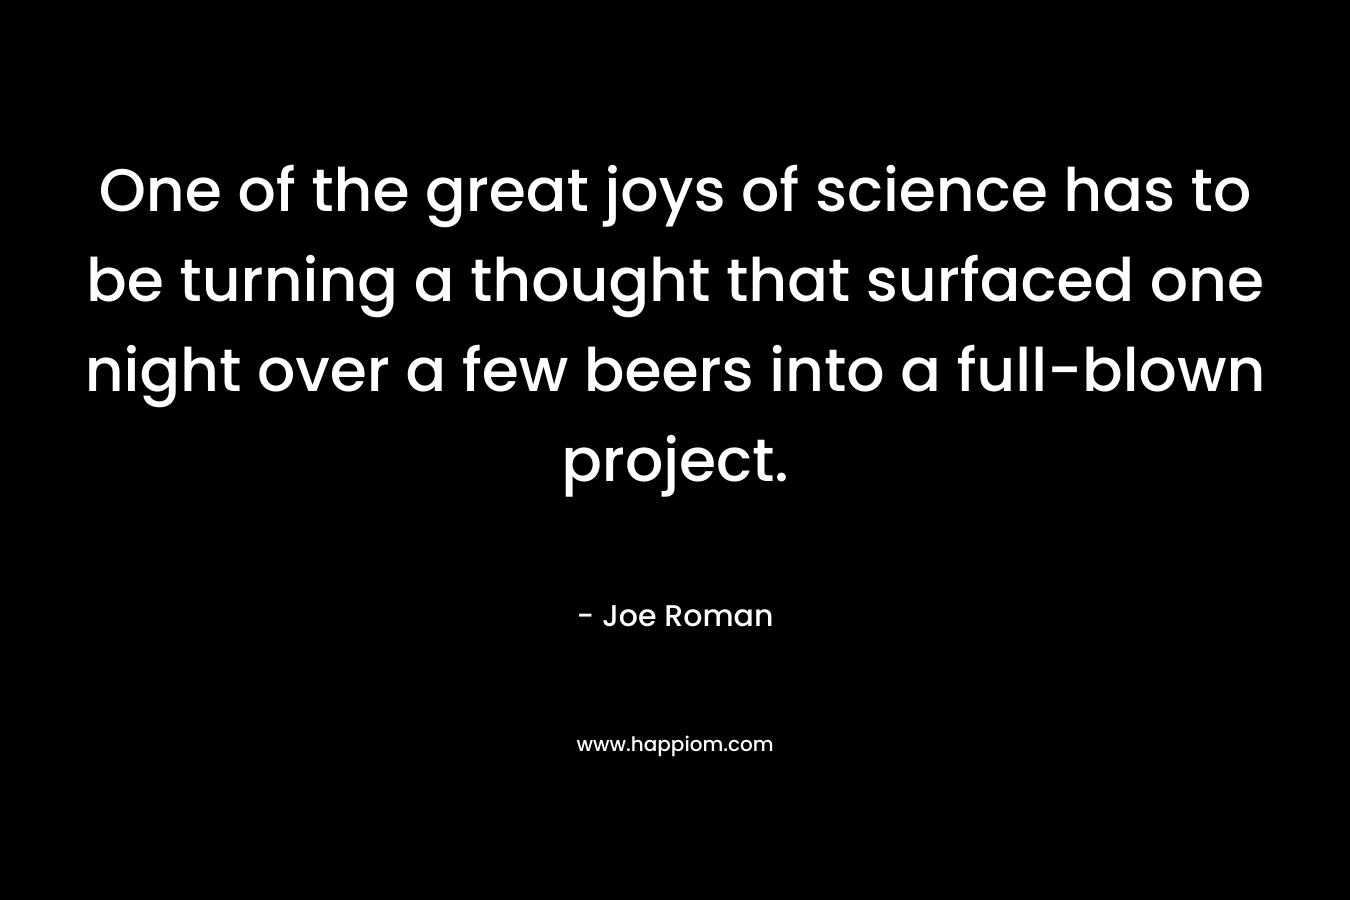 One of the great joys of science has to be turning a thought that surfaced one night over a few beers into a full-blown project. – Joe Roman